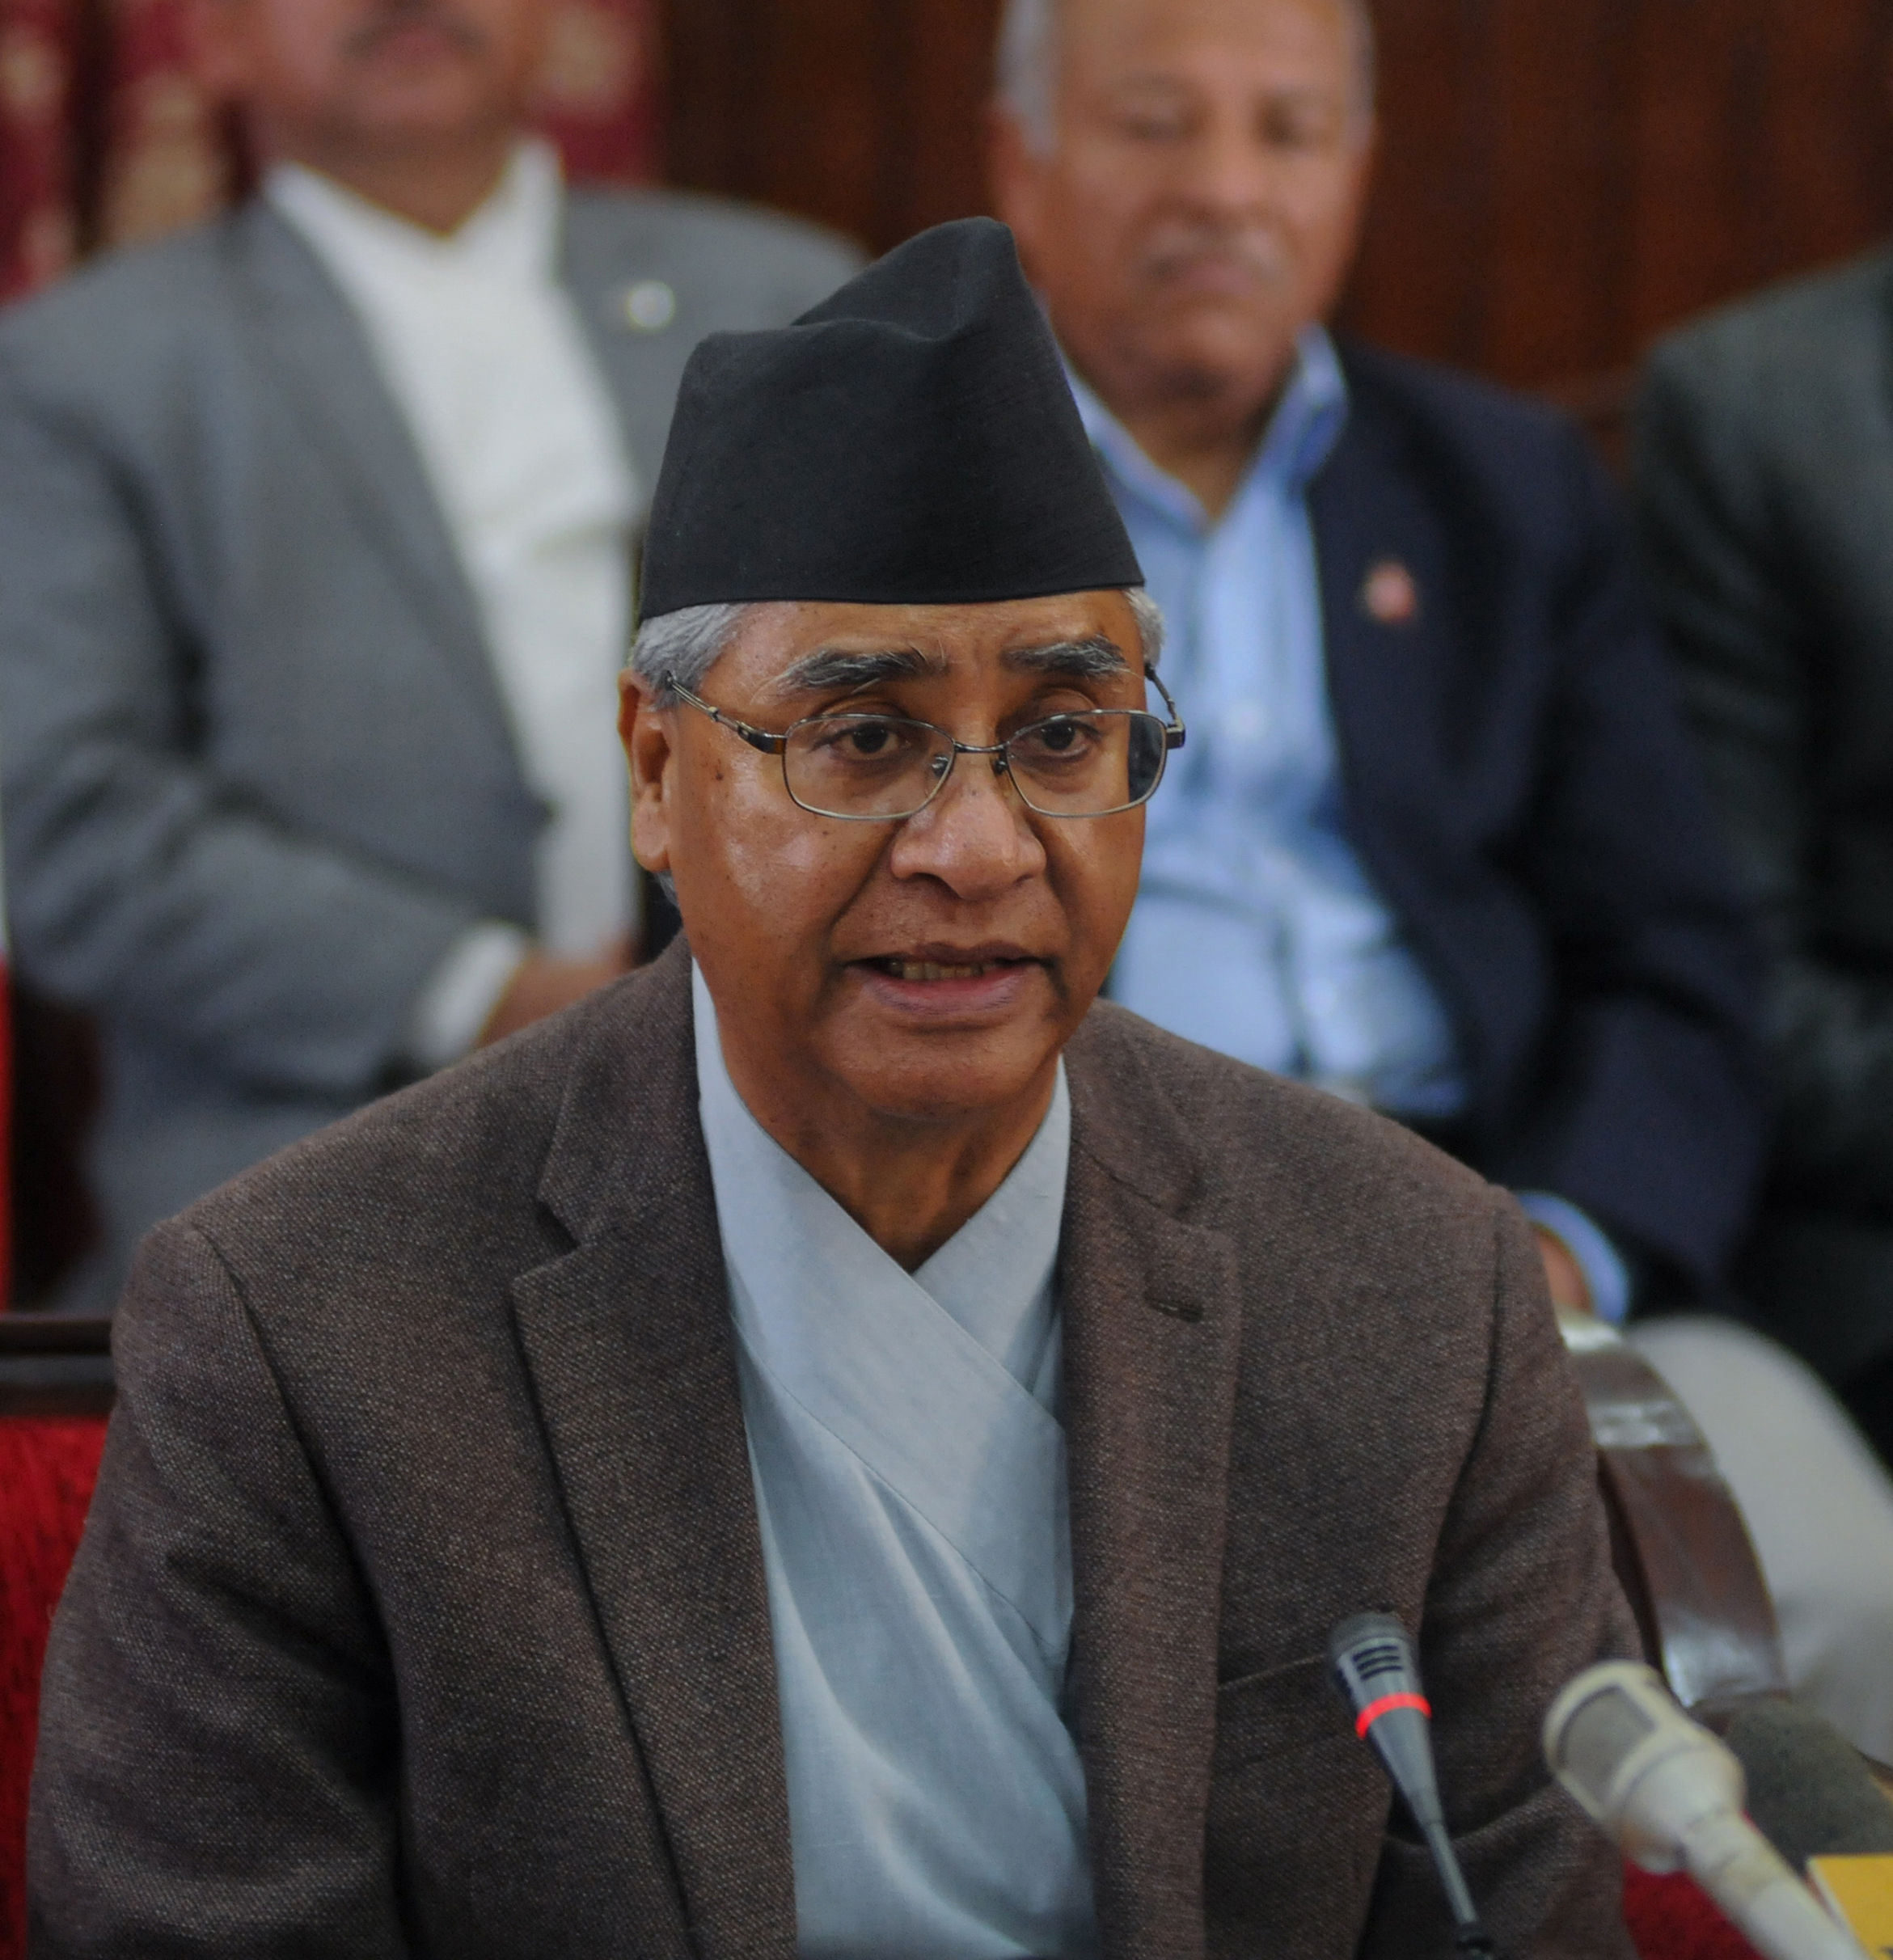 Deuba set to take over as Nepal Prime Minister, capping months of turmoil